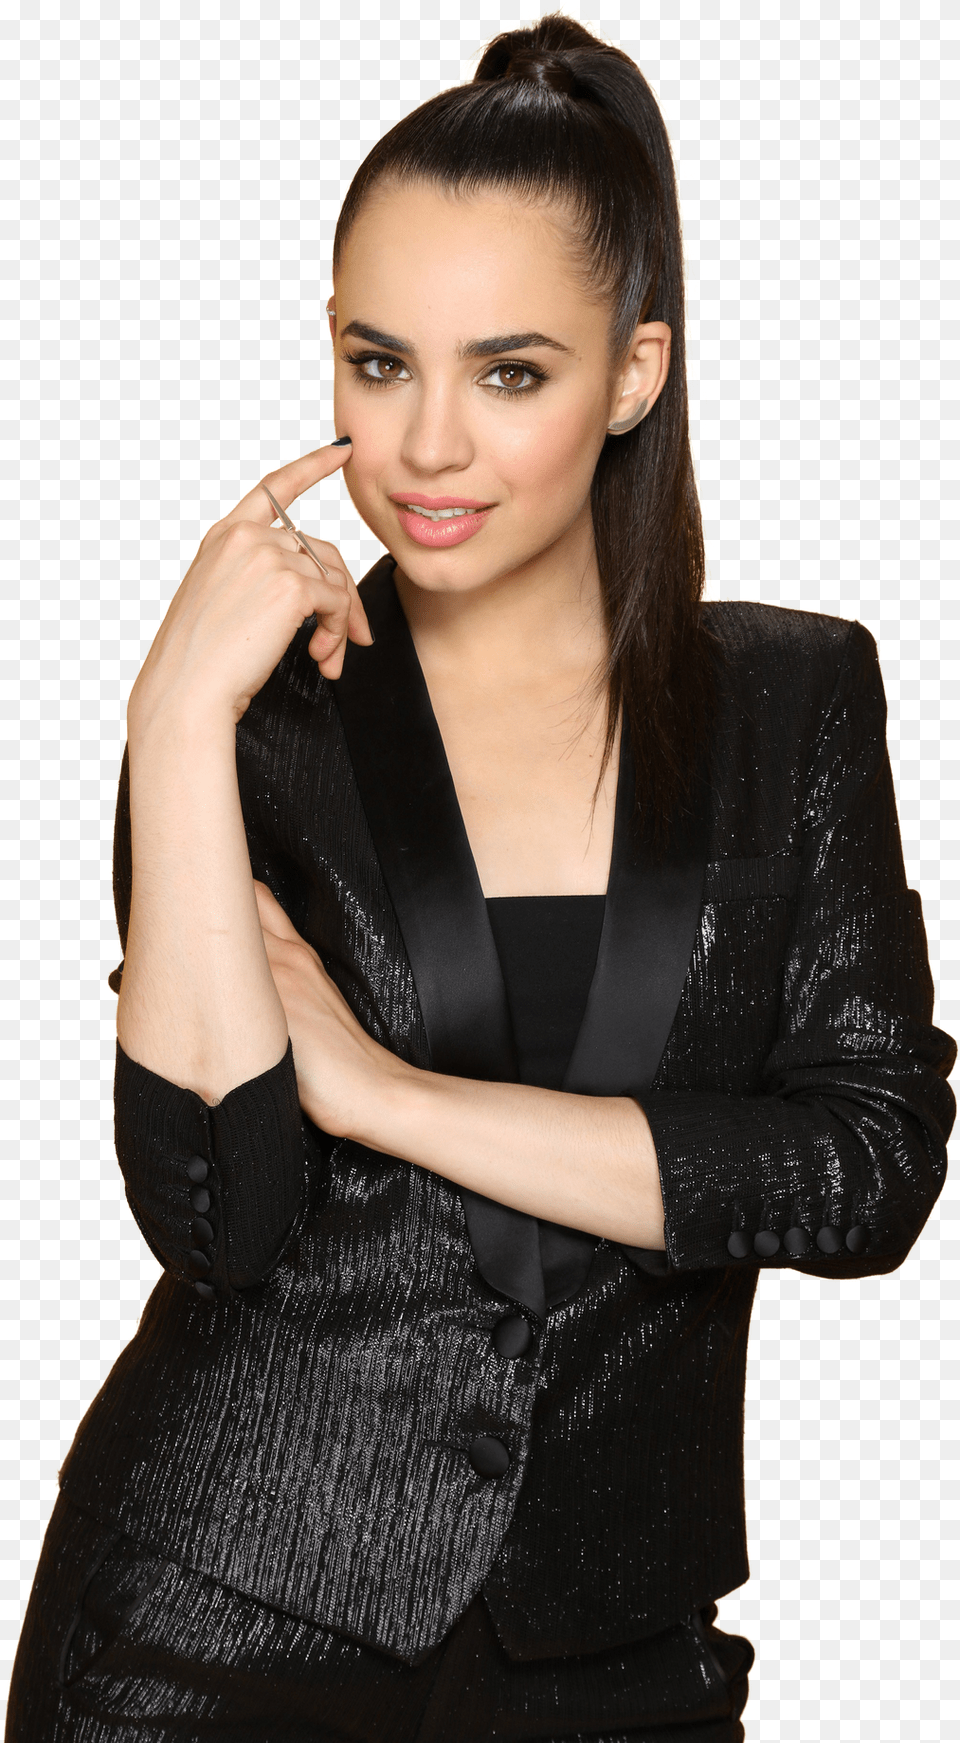 In Which We Makefind You Awesome Png39s Sofia Carson, Woman, Suit, Portrait, Photography Png